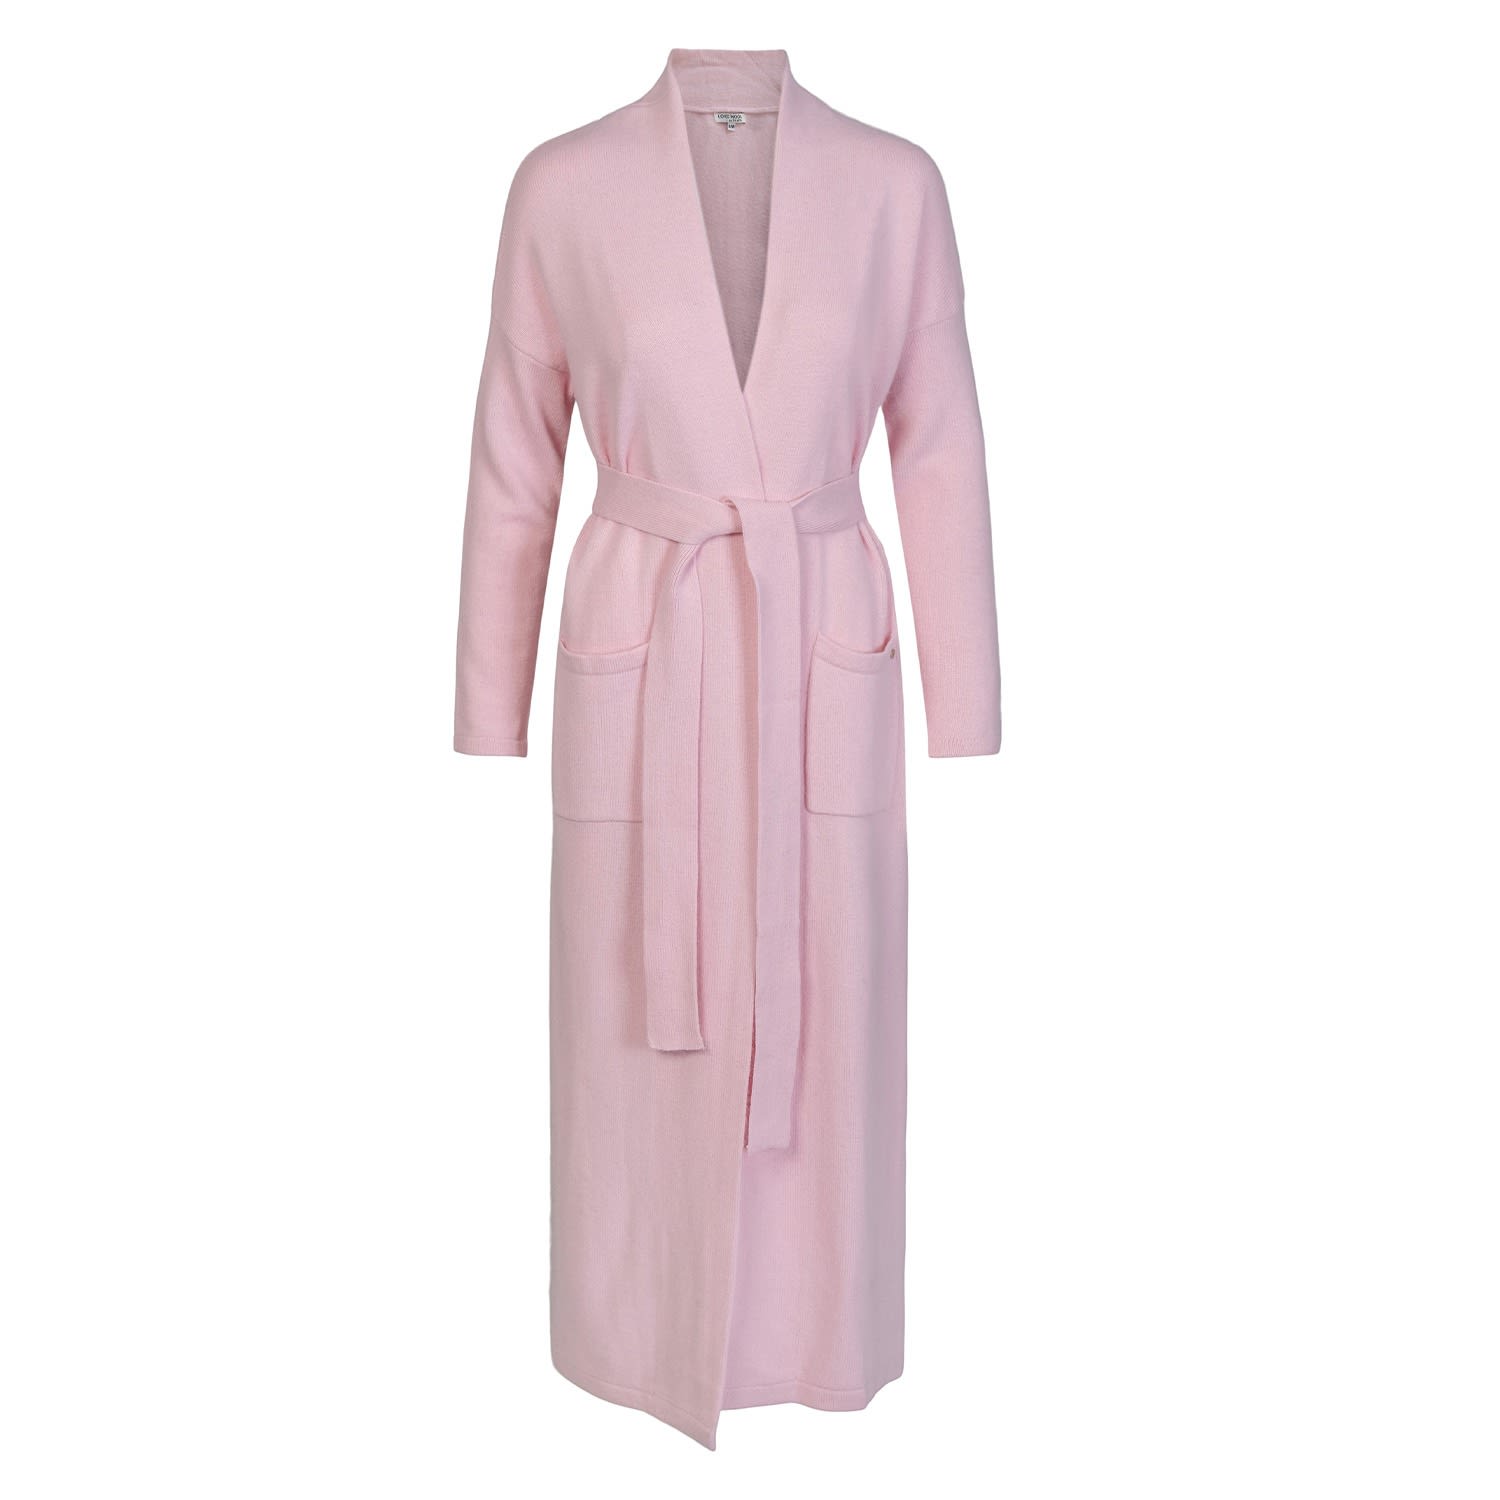 Women’s Pink / Purple "Camilla" Cashmere Dressing Gown - Baby Pink L/Xl Tirillm